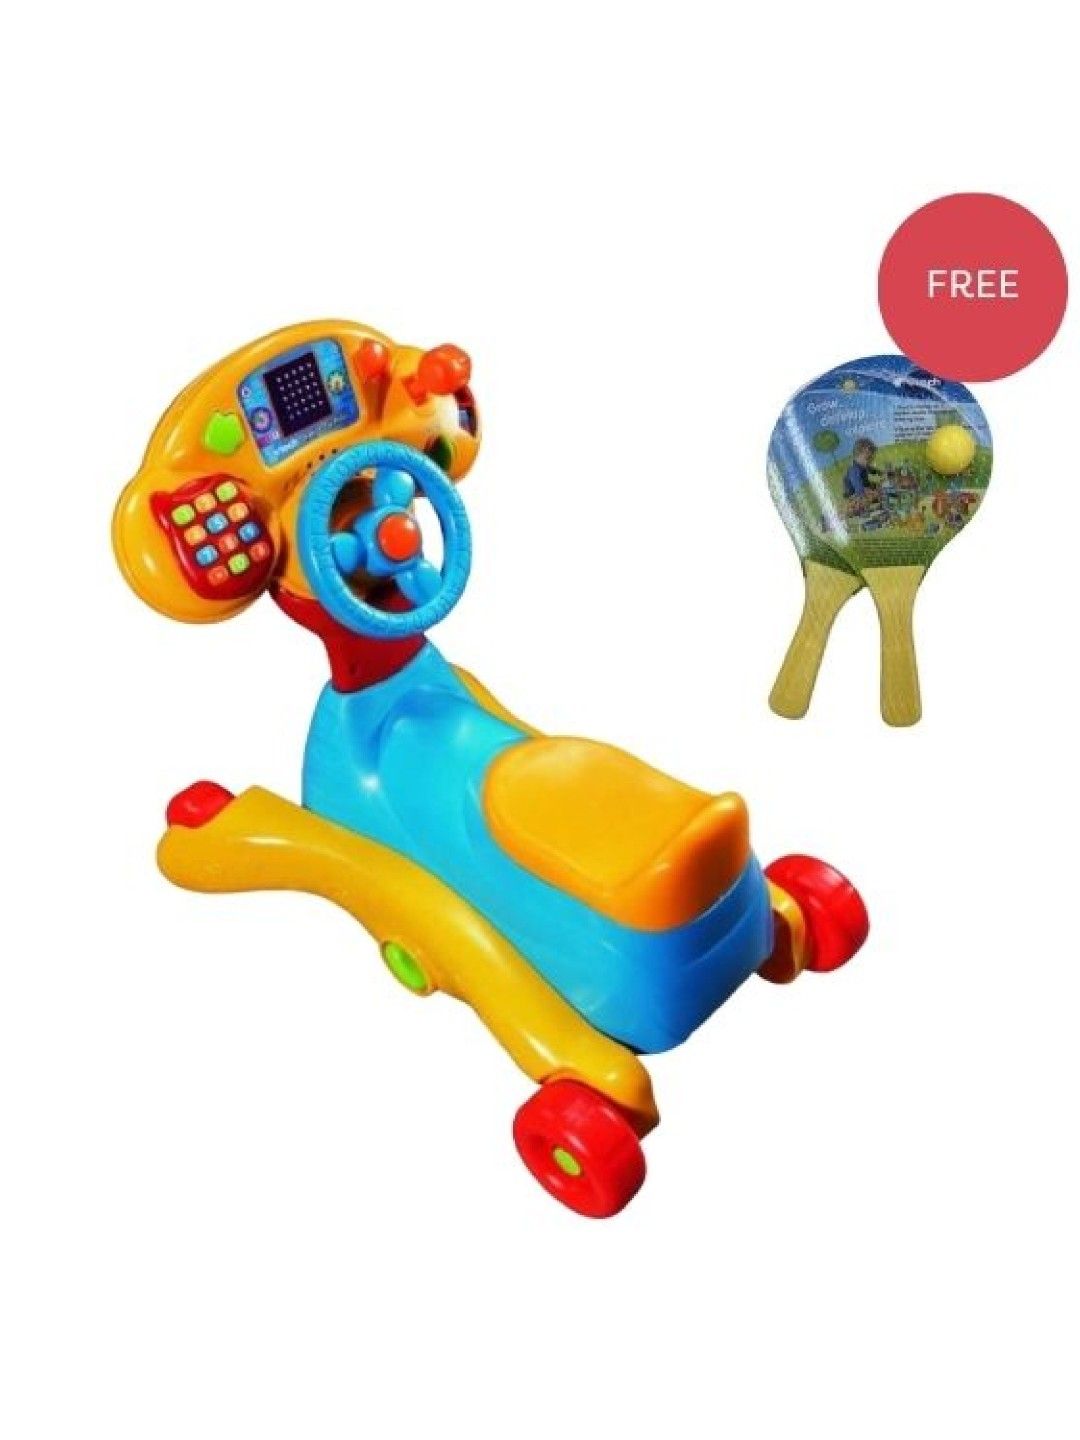 VTech All-In-One Play Centre with FREE Ping Pong Balls